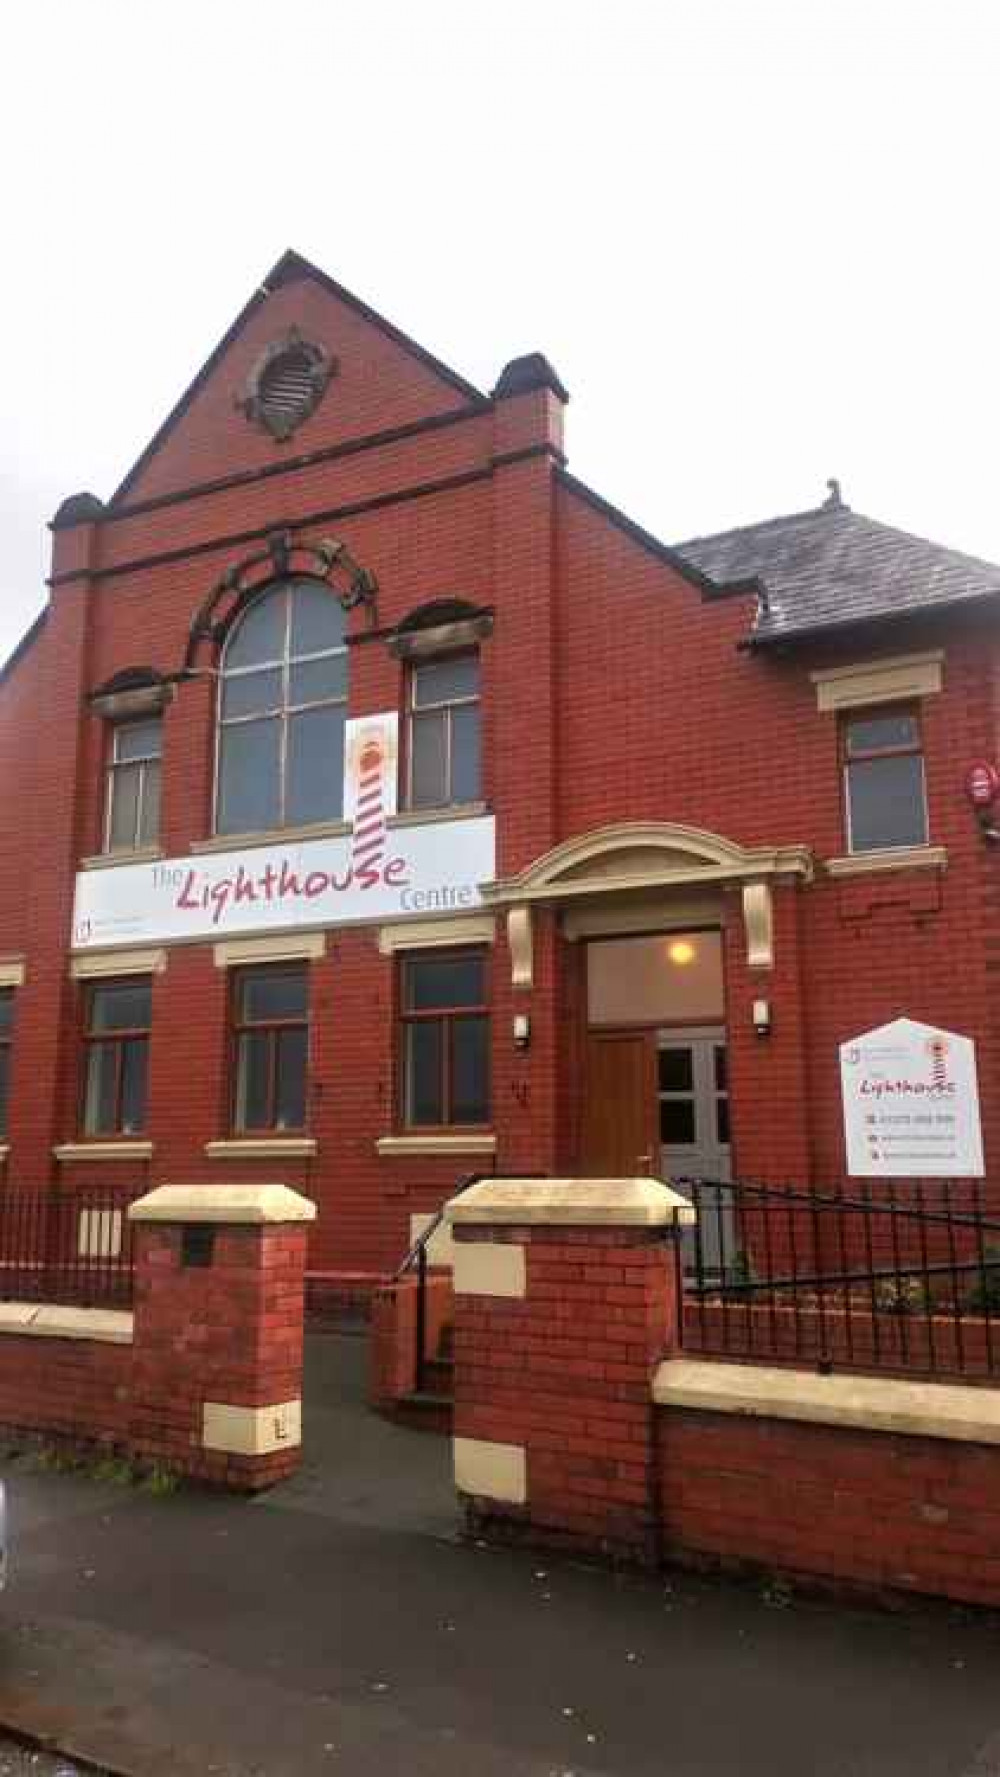 The Lighthouse Centre in Stewart Street.